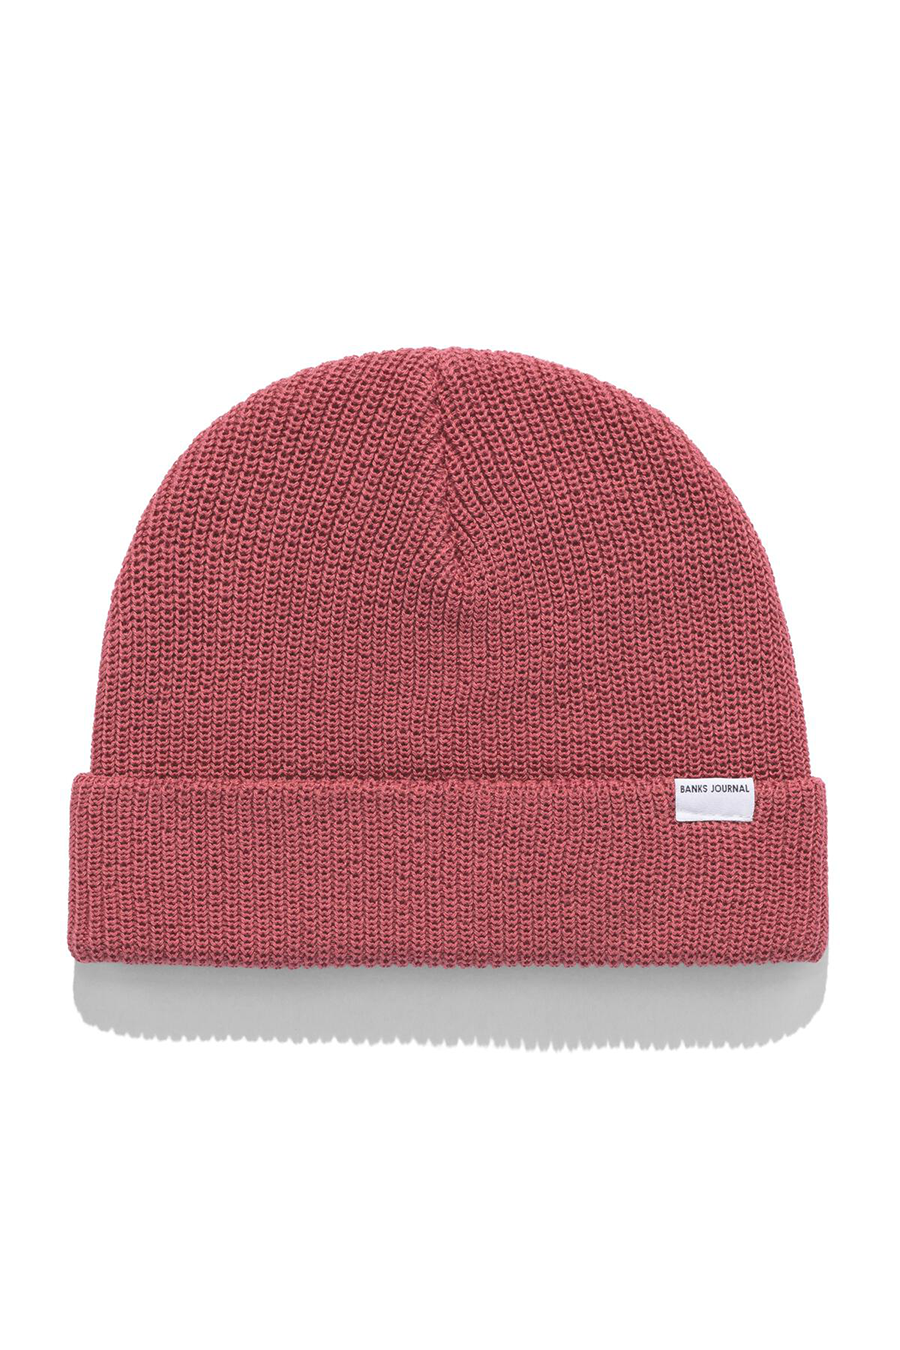 Primary Beanie | Faded Rose - Main Image Number 1 of 1